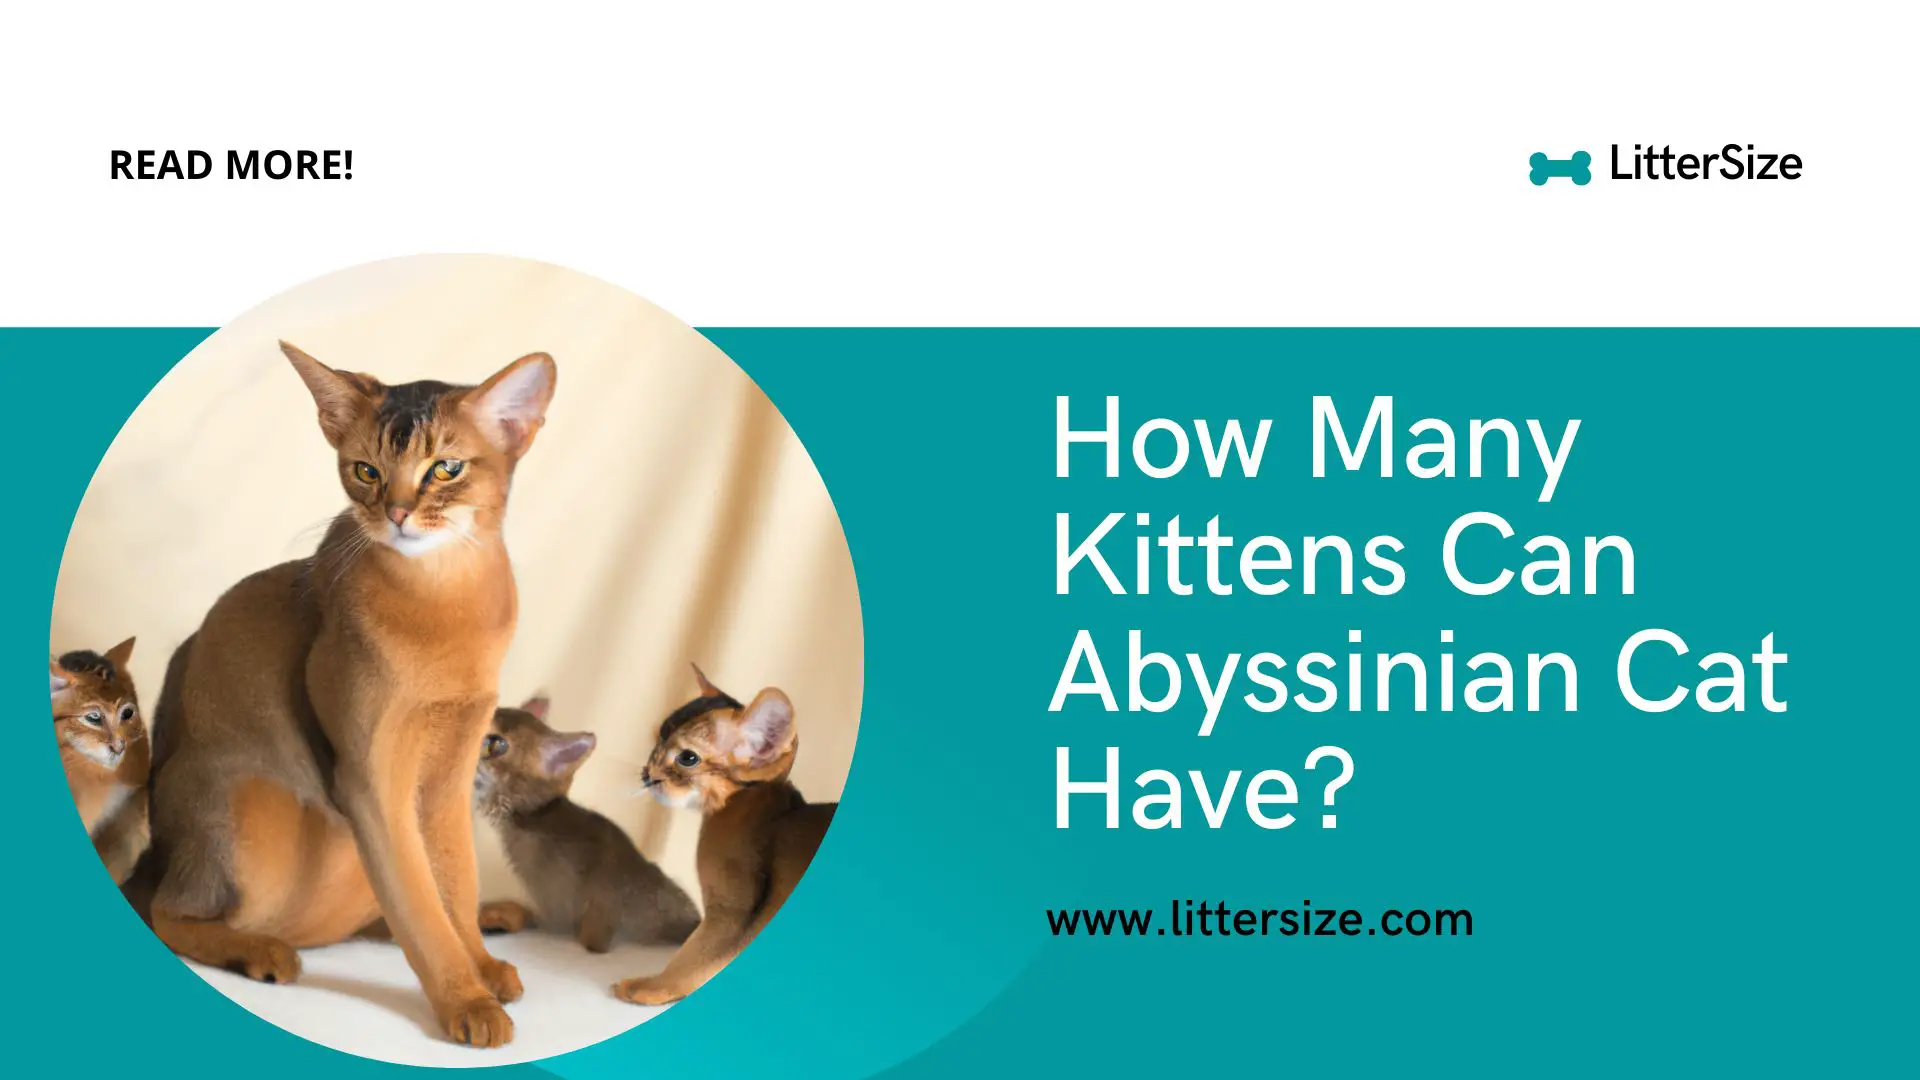 How Many Kittens Can Abyssinian Cat Have?